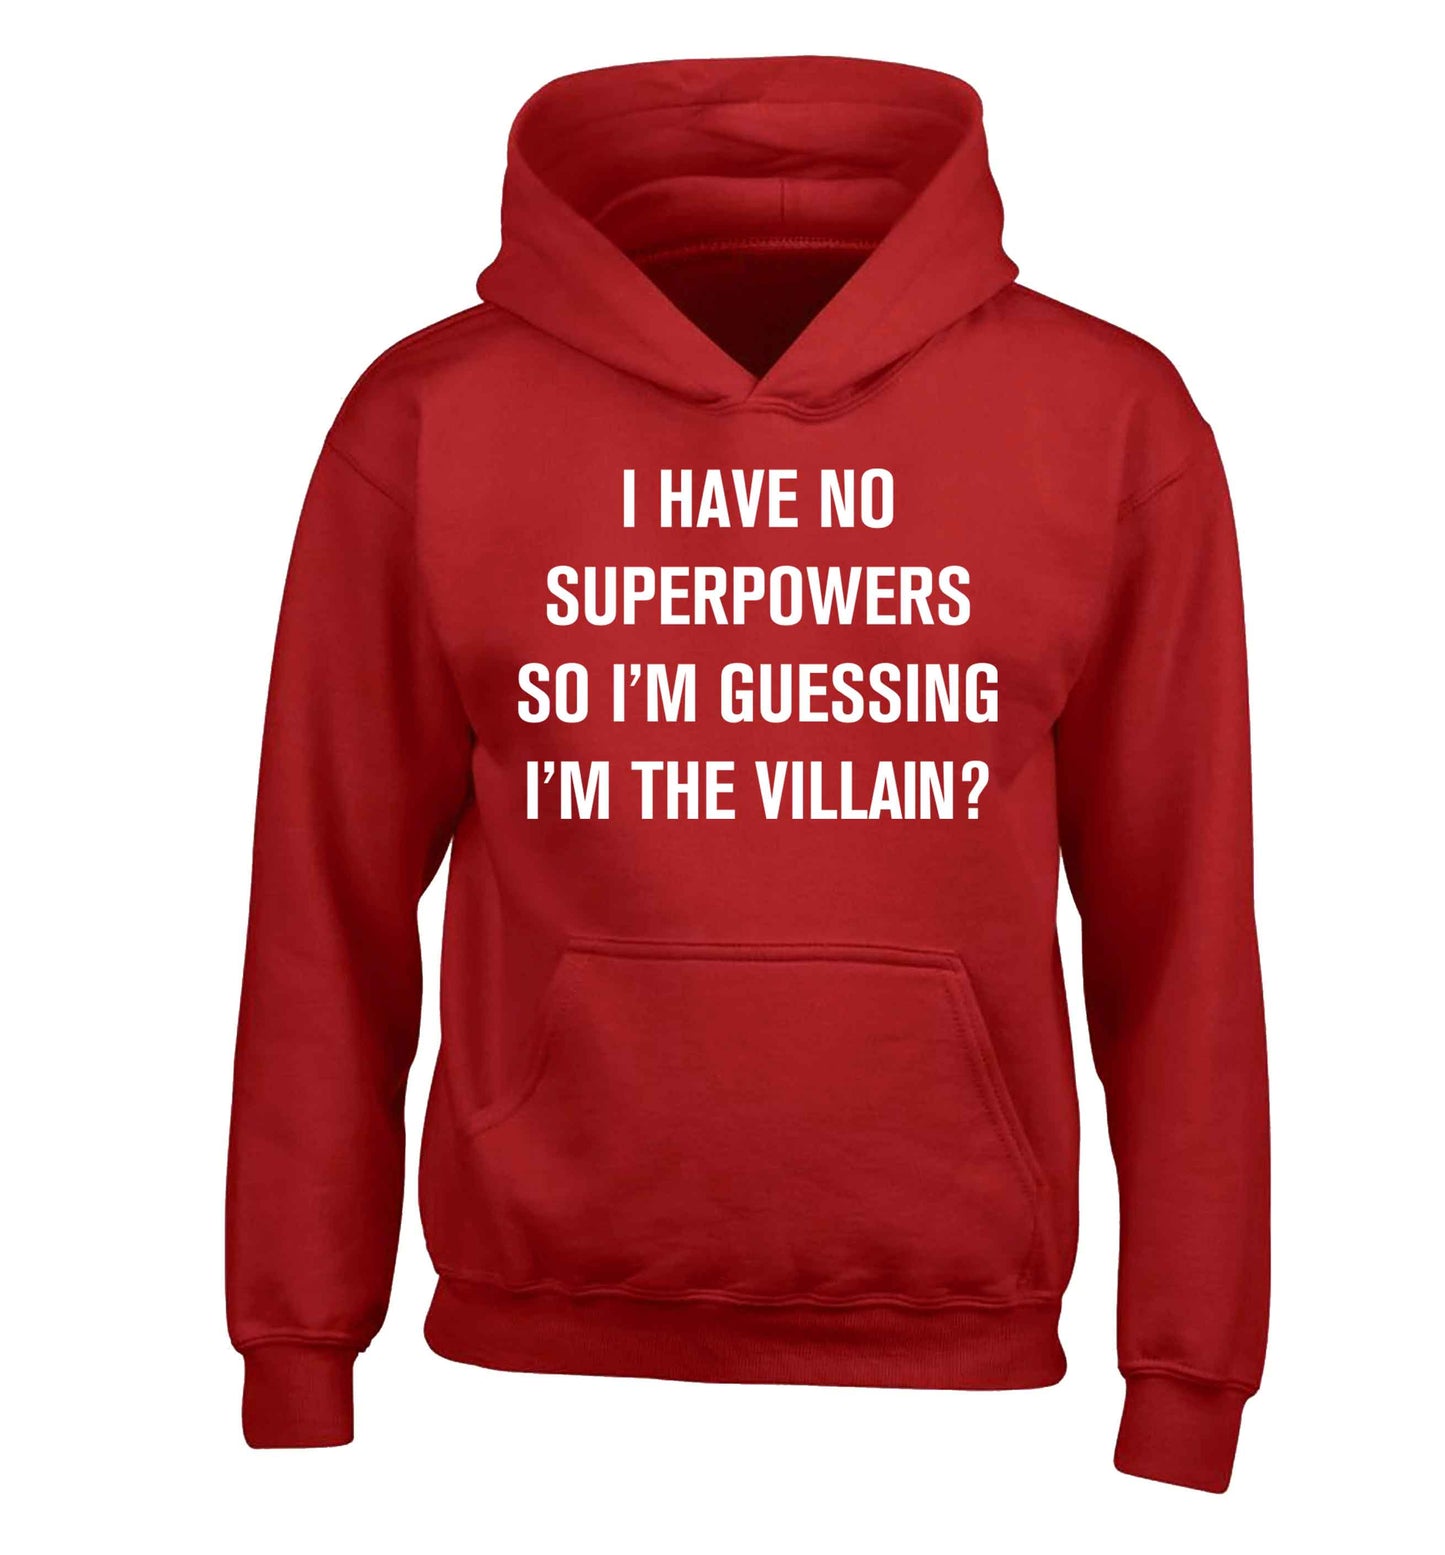 I have no superpowers so I'm guessing I'm the villain? children's red hoodie 12-13 Years